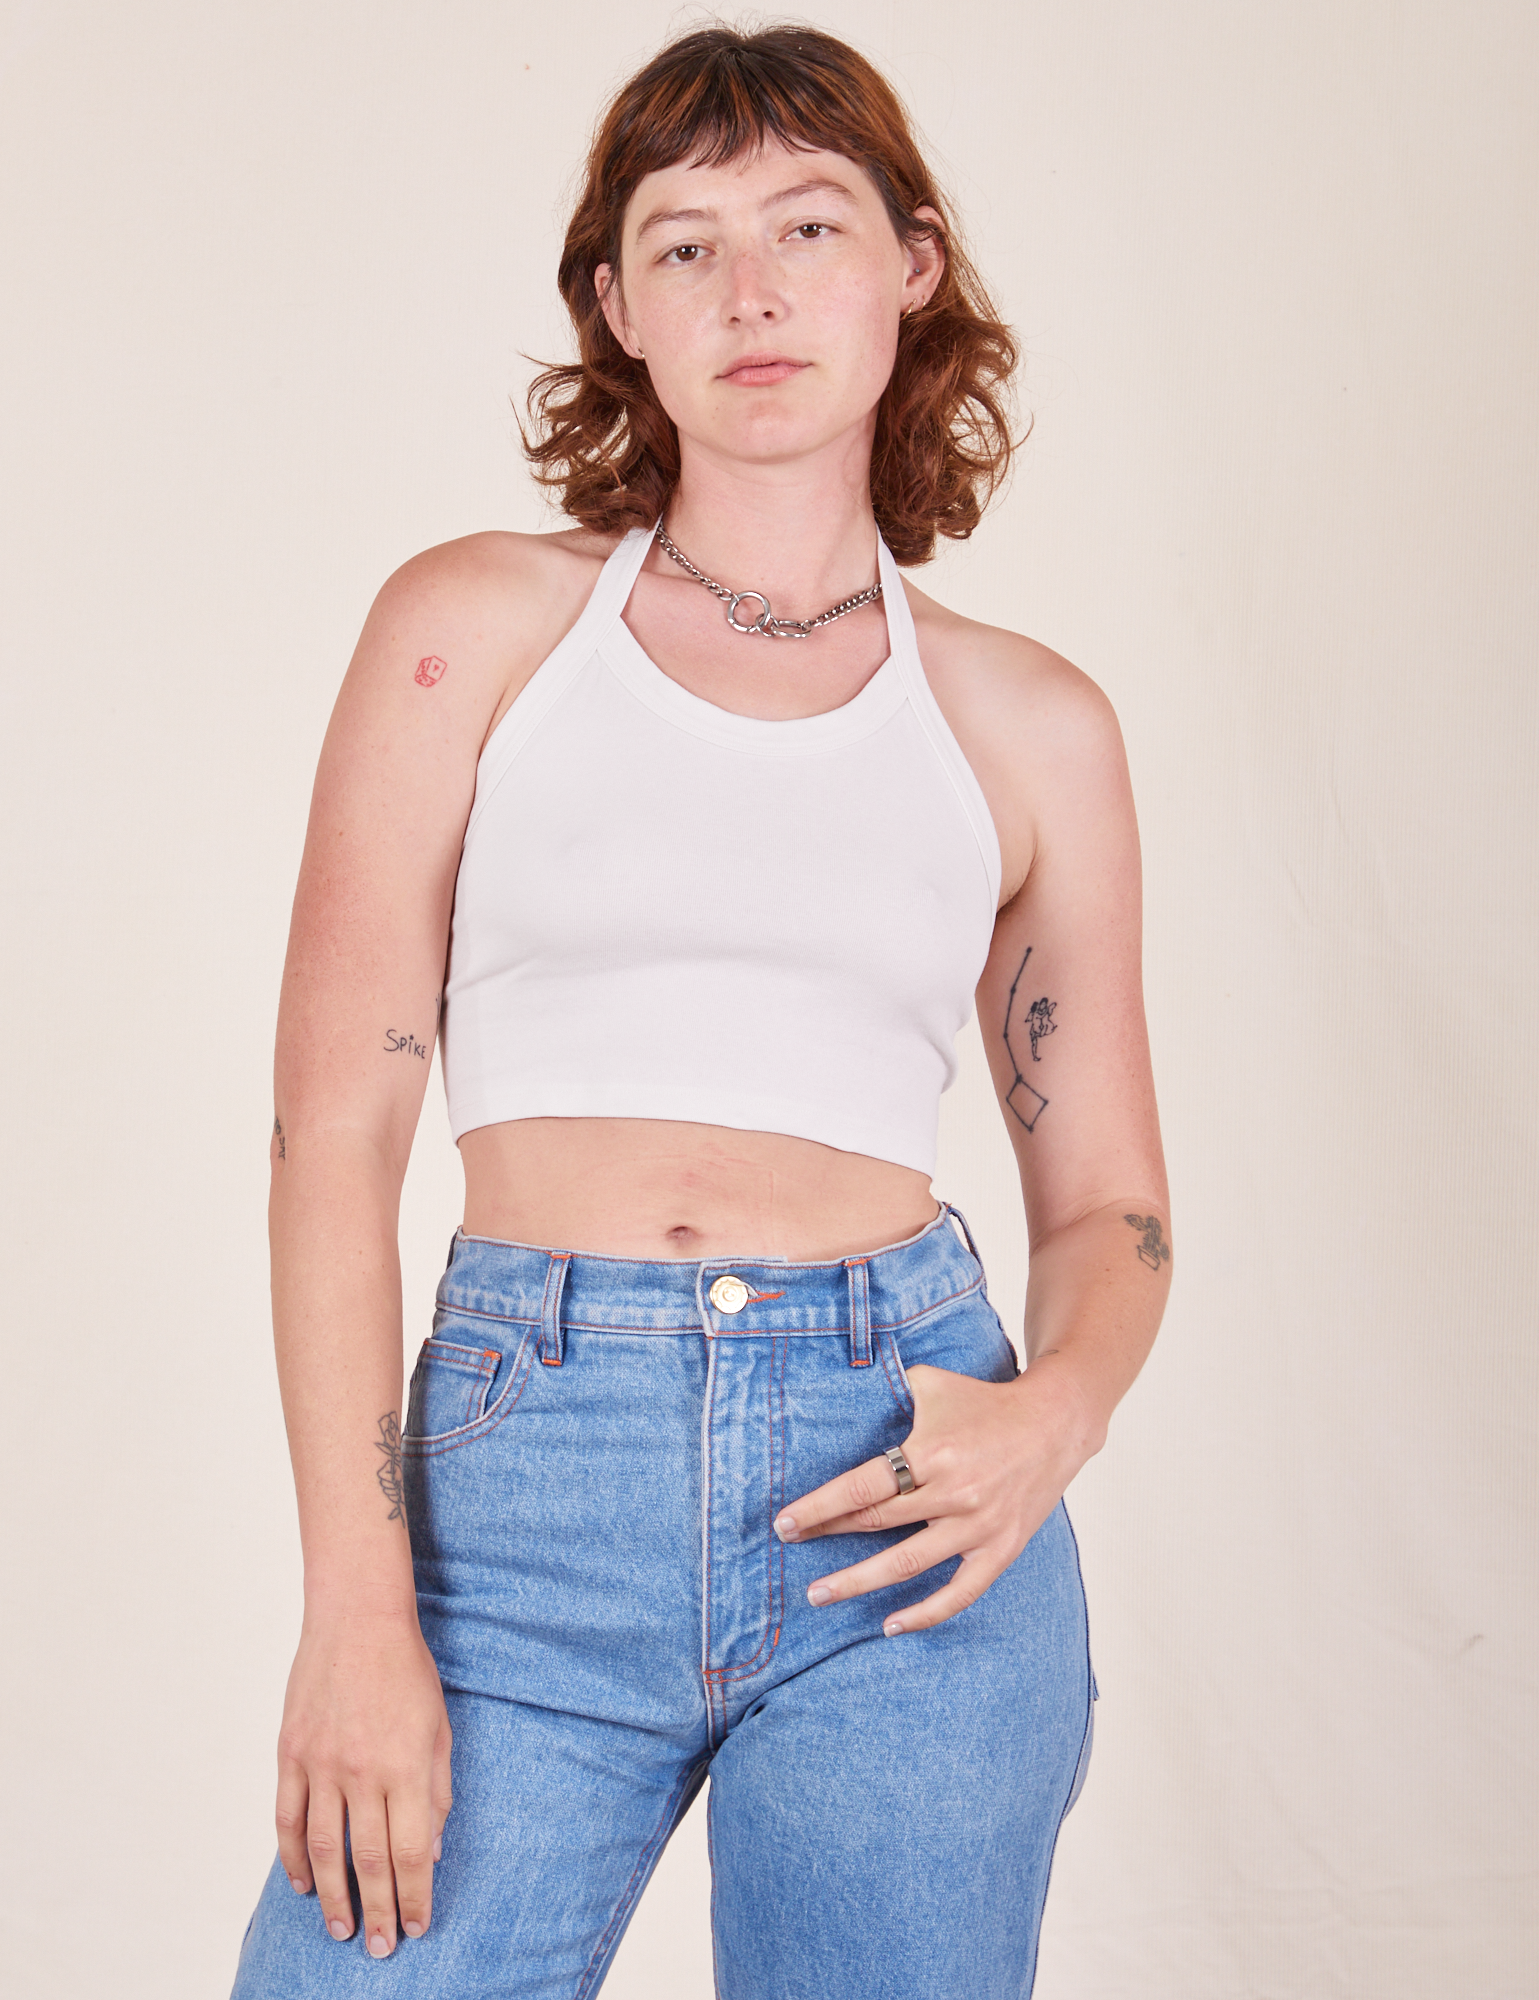 Alex is 5&#39;8&quot; and wearing P Halter Top in Vintage Off-White paired with light wash Frontier Pants